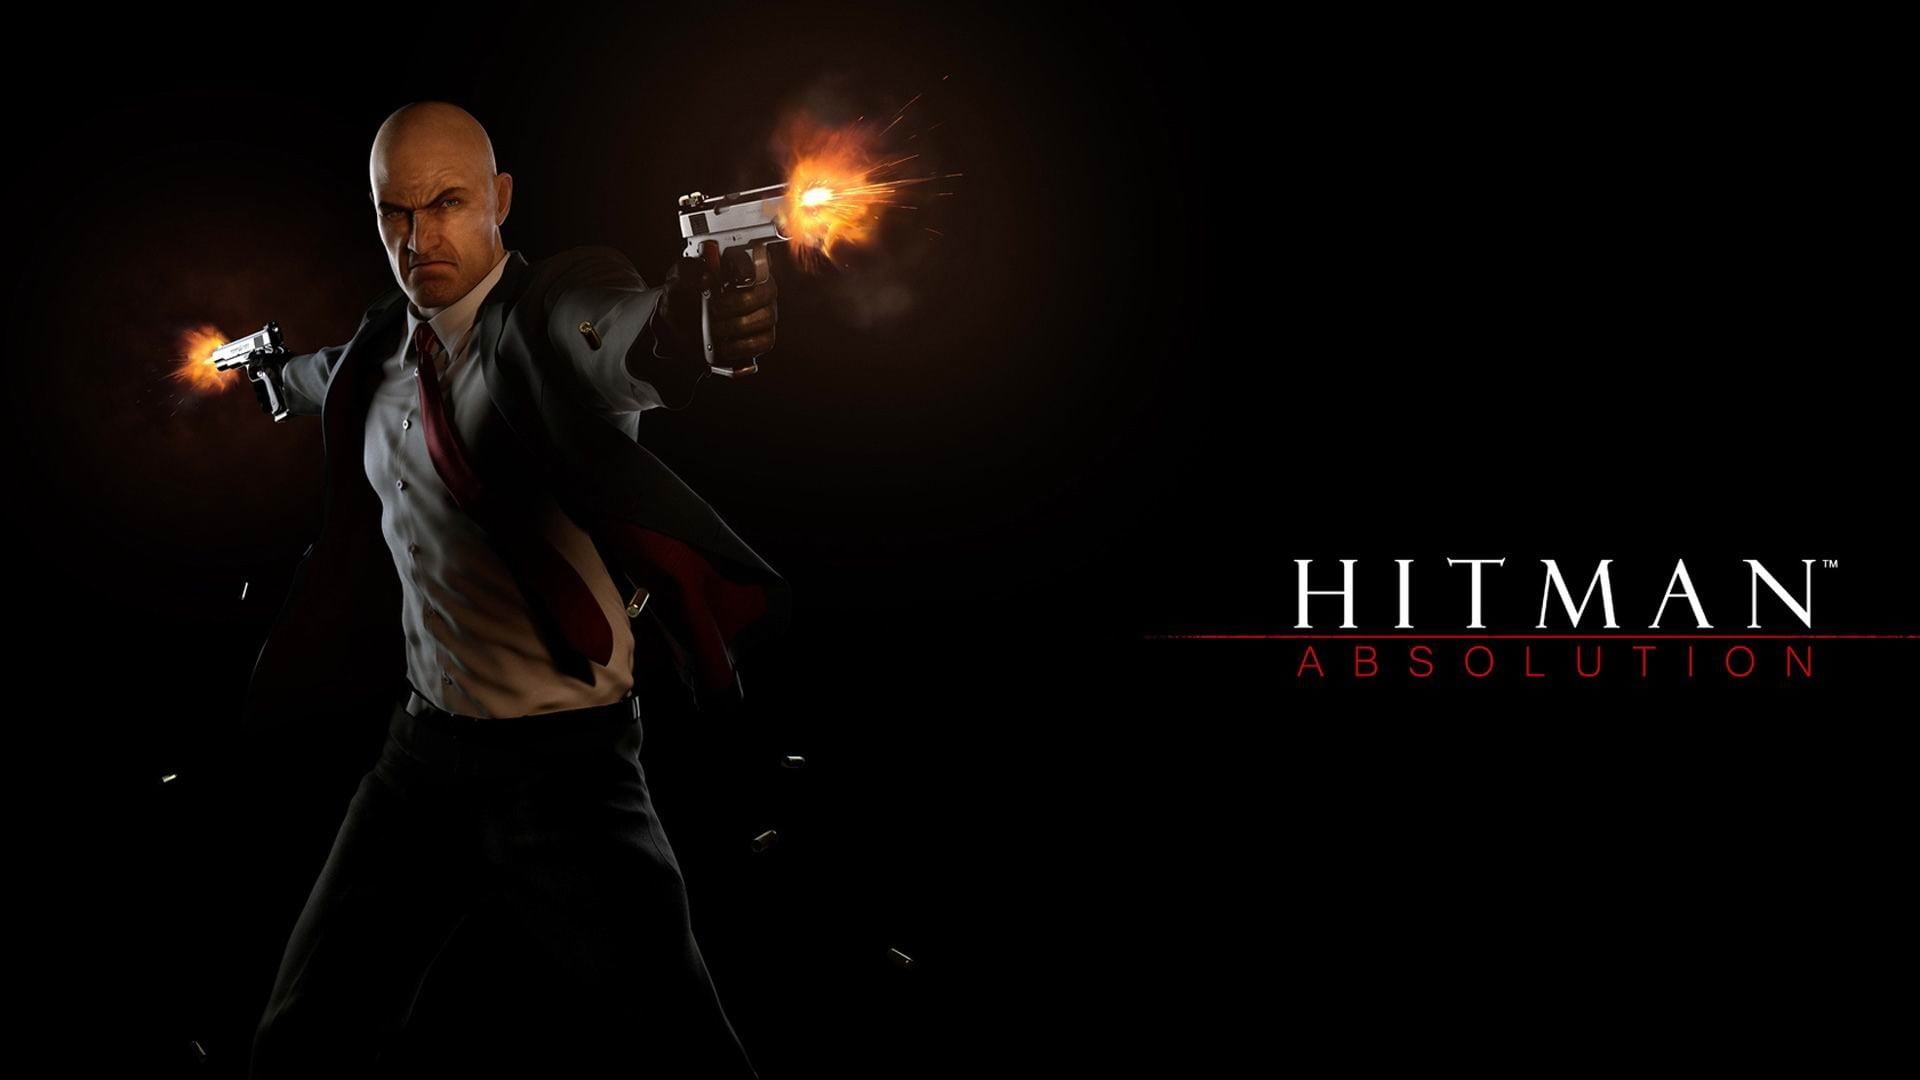 Hitman Background Pictures